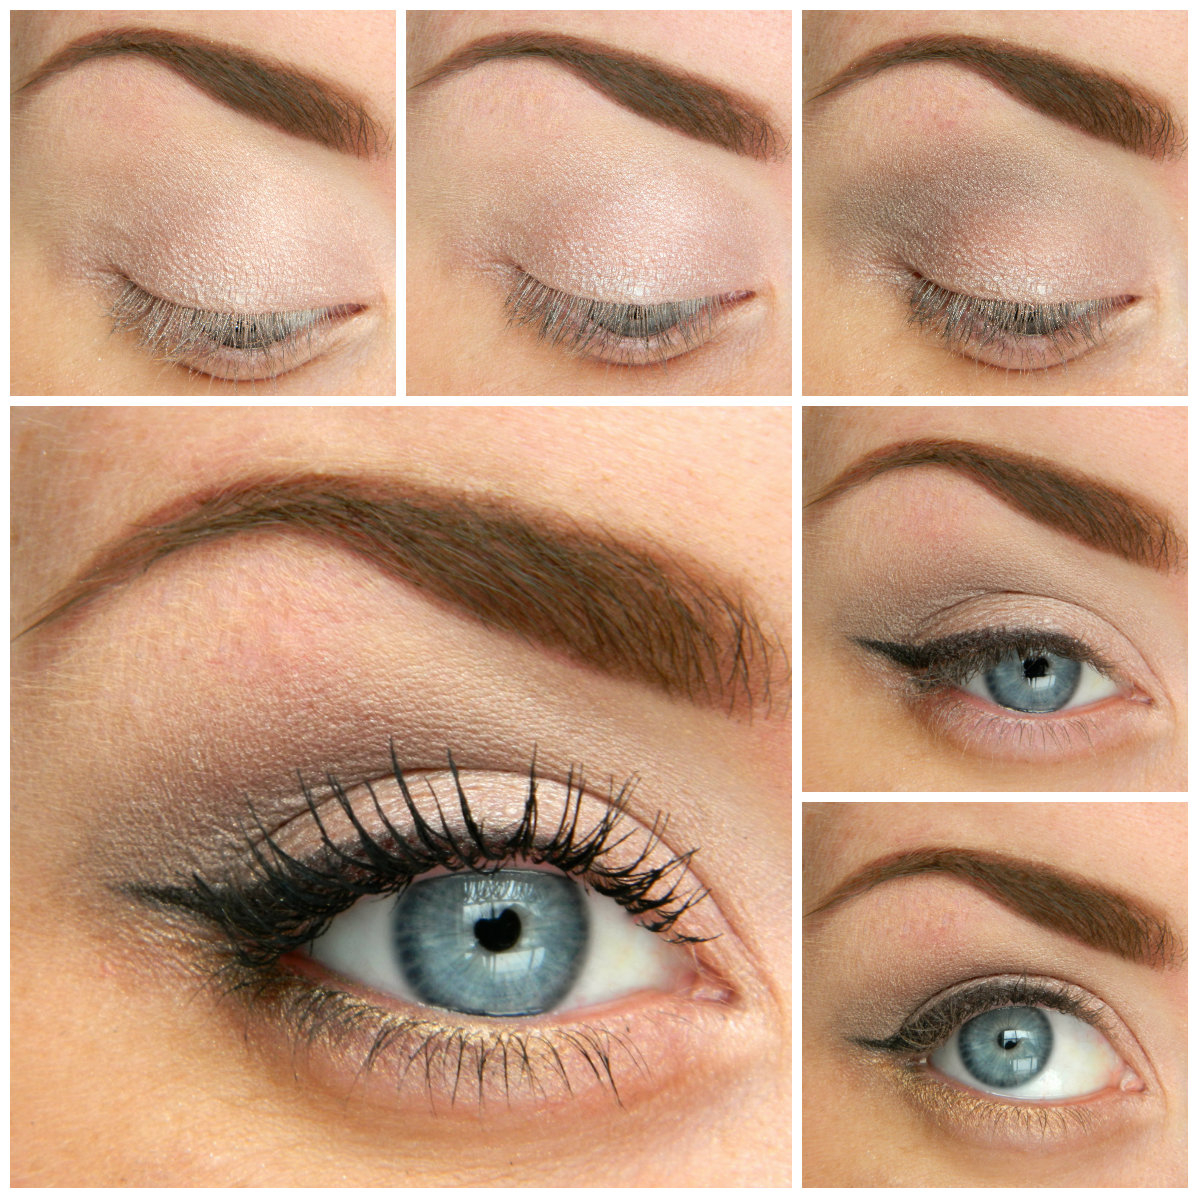 Pretty Light Eye Makeup 5 Ways To Make Blue Eyes Pop With Proper Eye Makeup Her Style Code